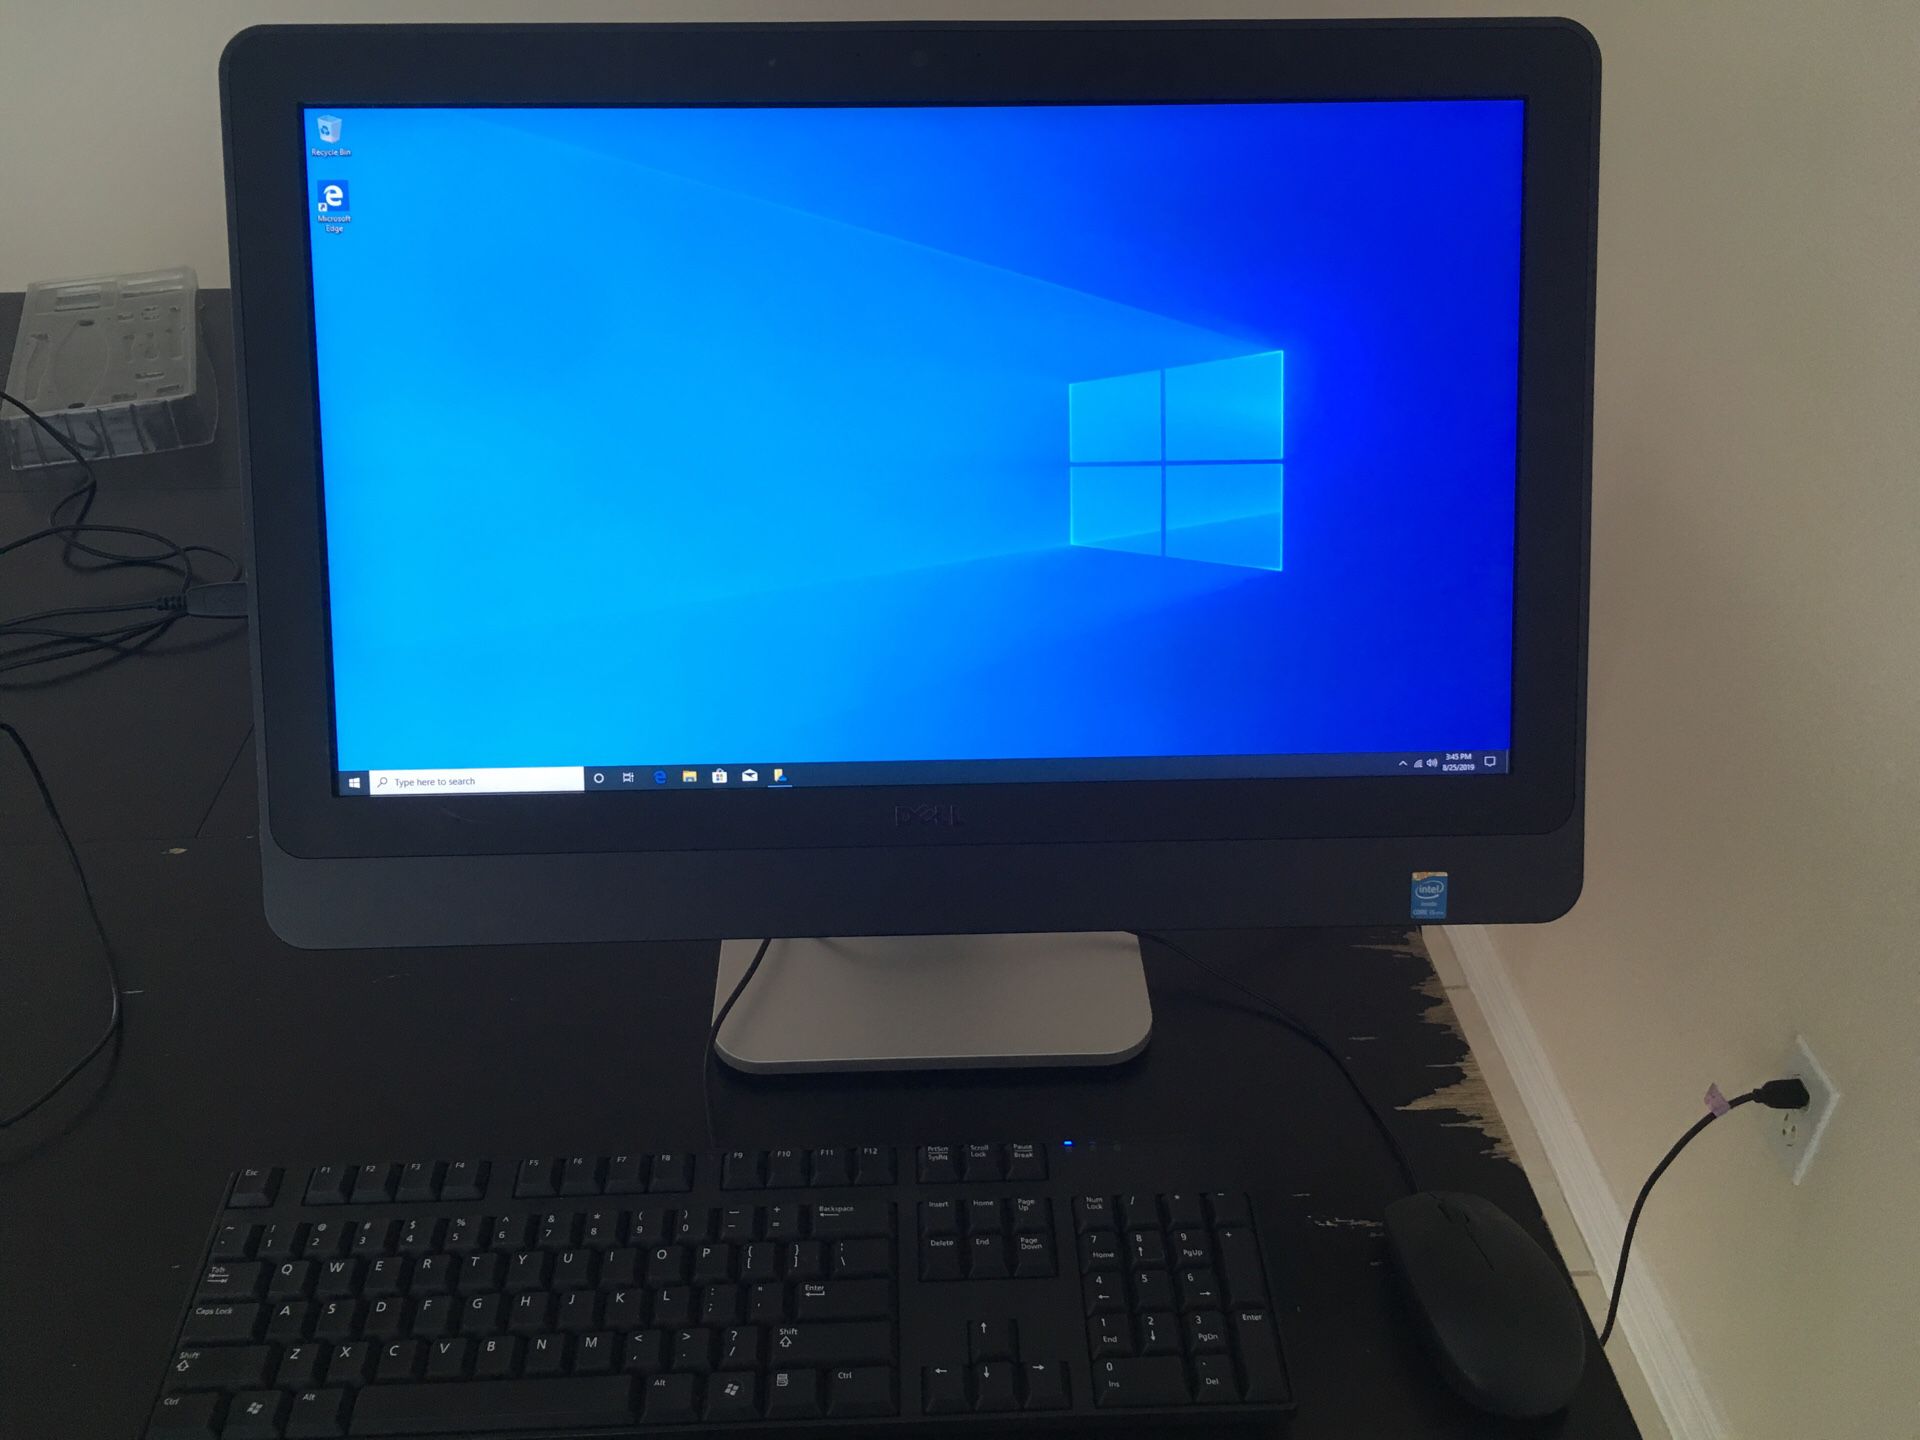 Dell intel core i5 4570s cpu 2.90GHz all in one AIO pc with keyboard and mouse Windows 10